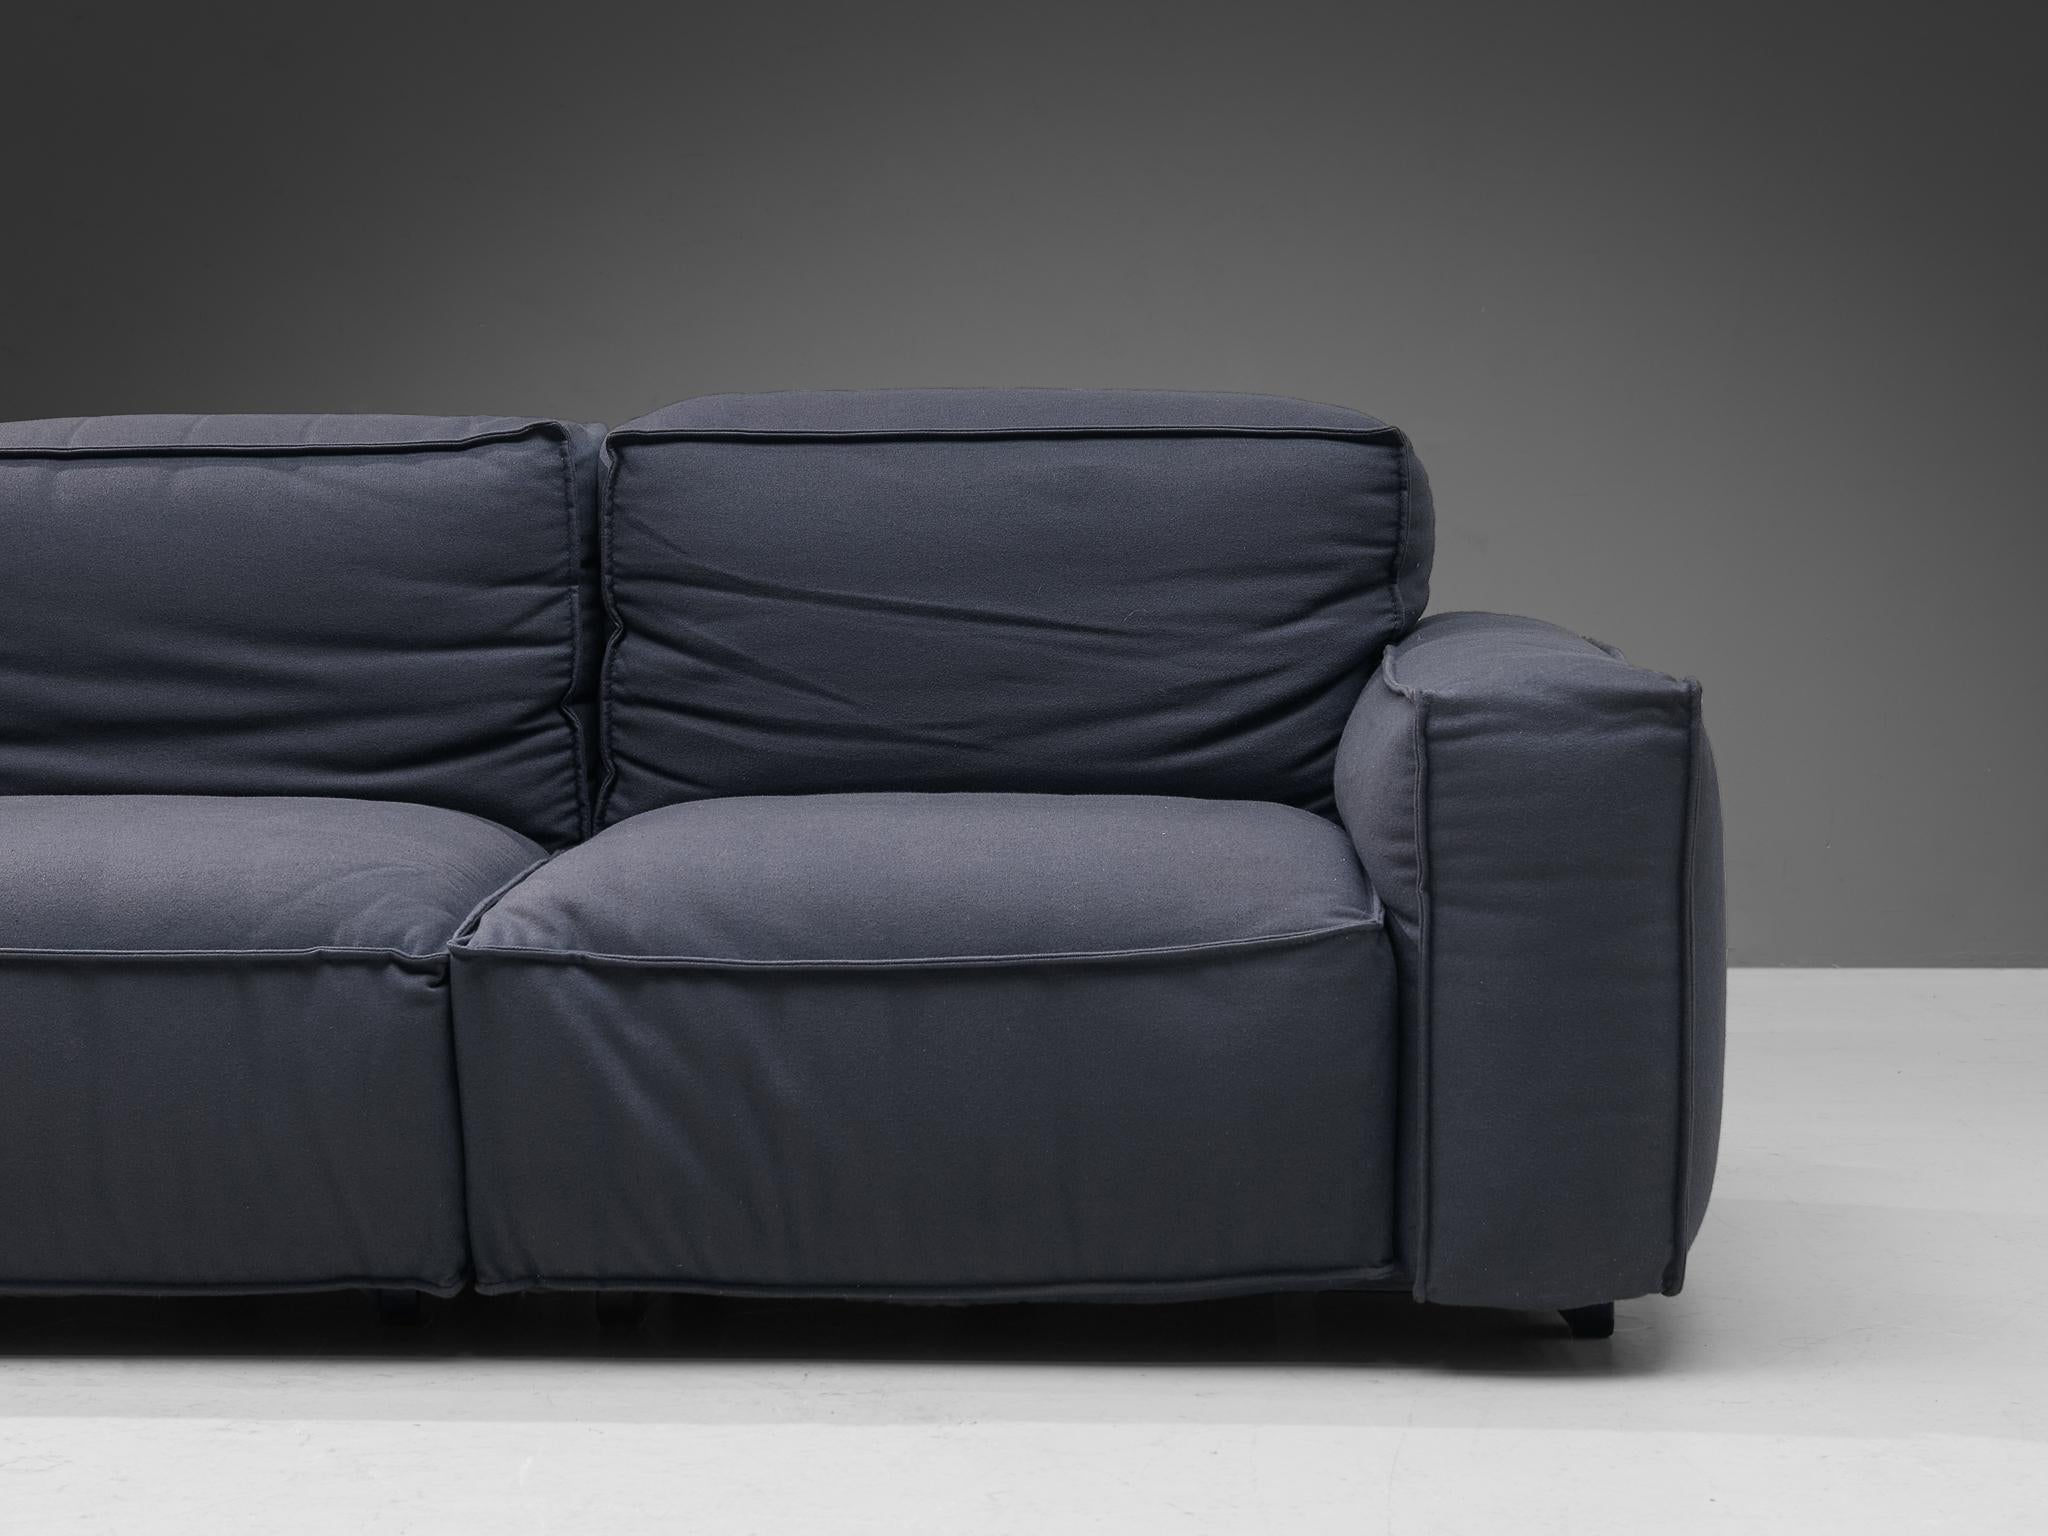 Mario Marenco for Arflex Four-Seater Sofa in Blue Woolen Upholstery